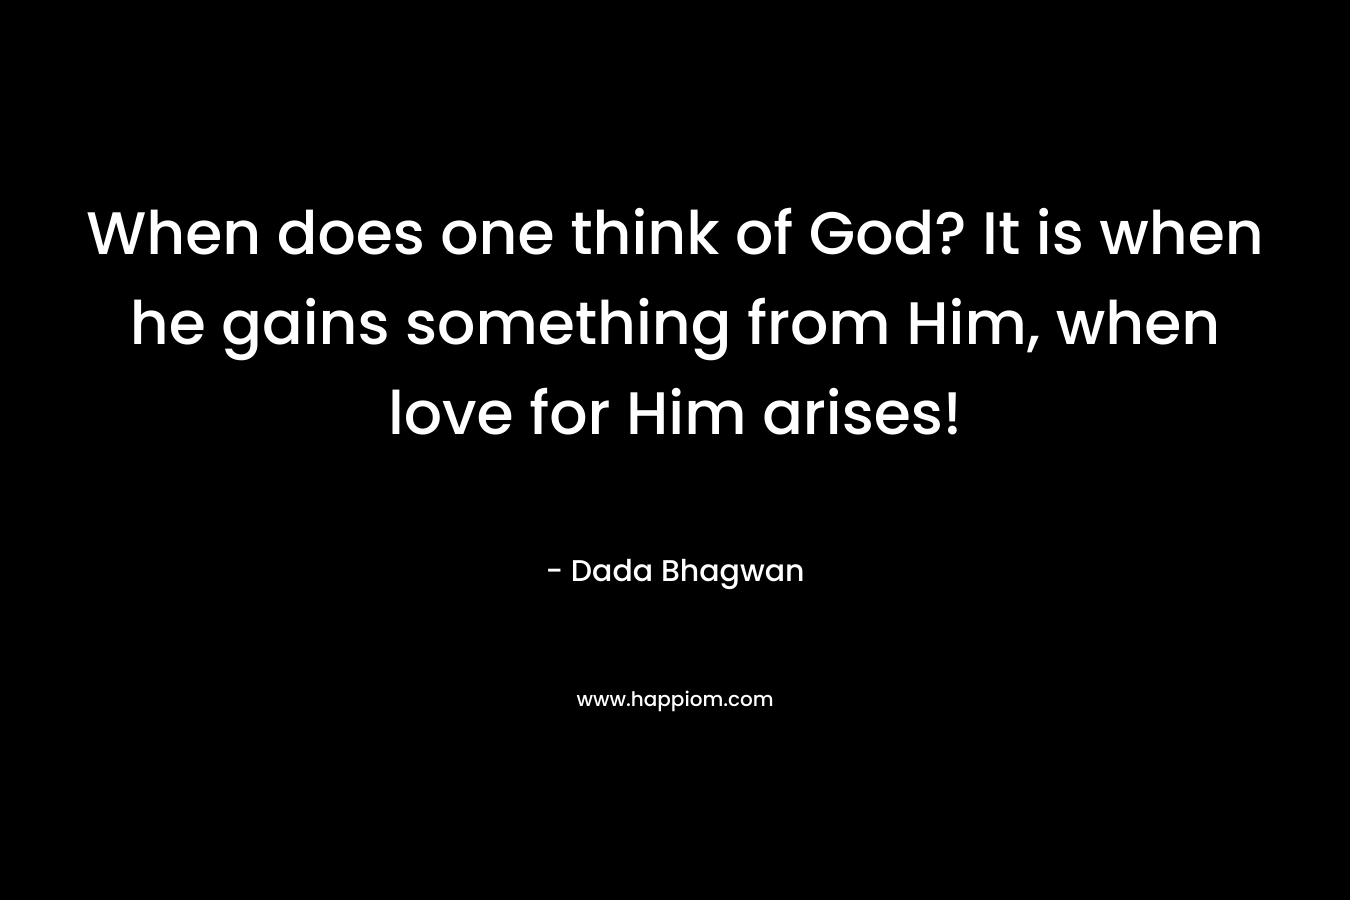 When does one think of God? It is when he gains something from Him, when love for Him arises!